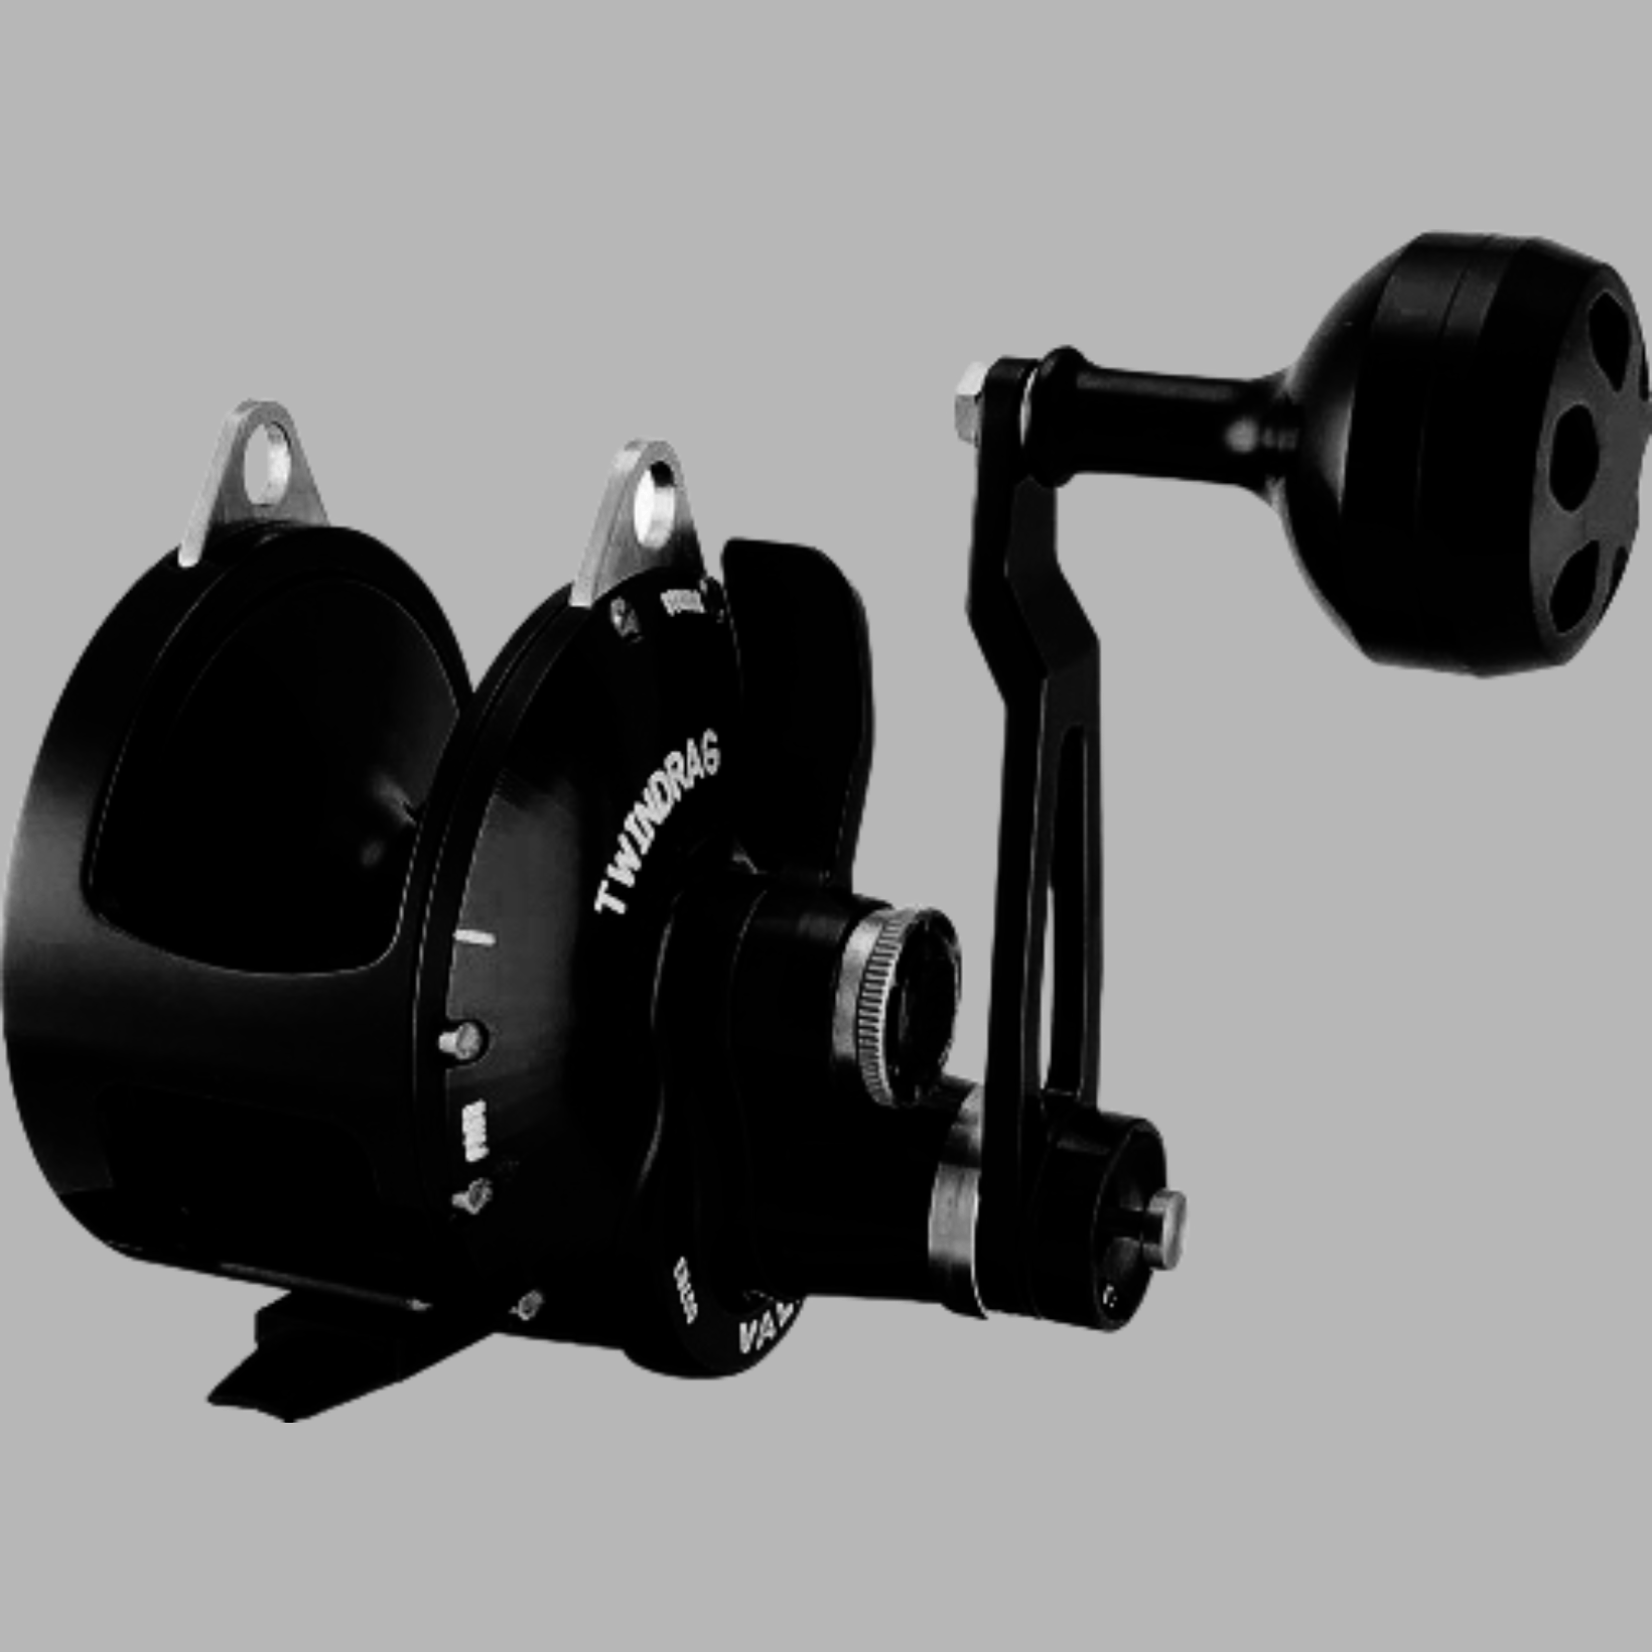 Accurate Boss Valiant BV2-600N-SPJ 2-Speed Matte Black - Angler's Choice  Tackle